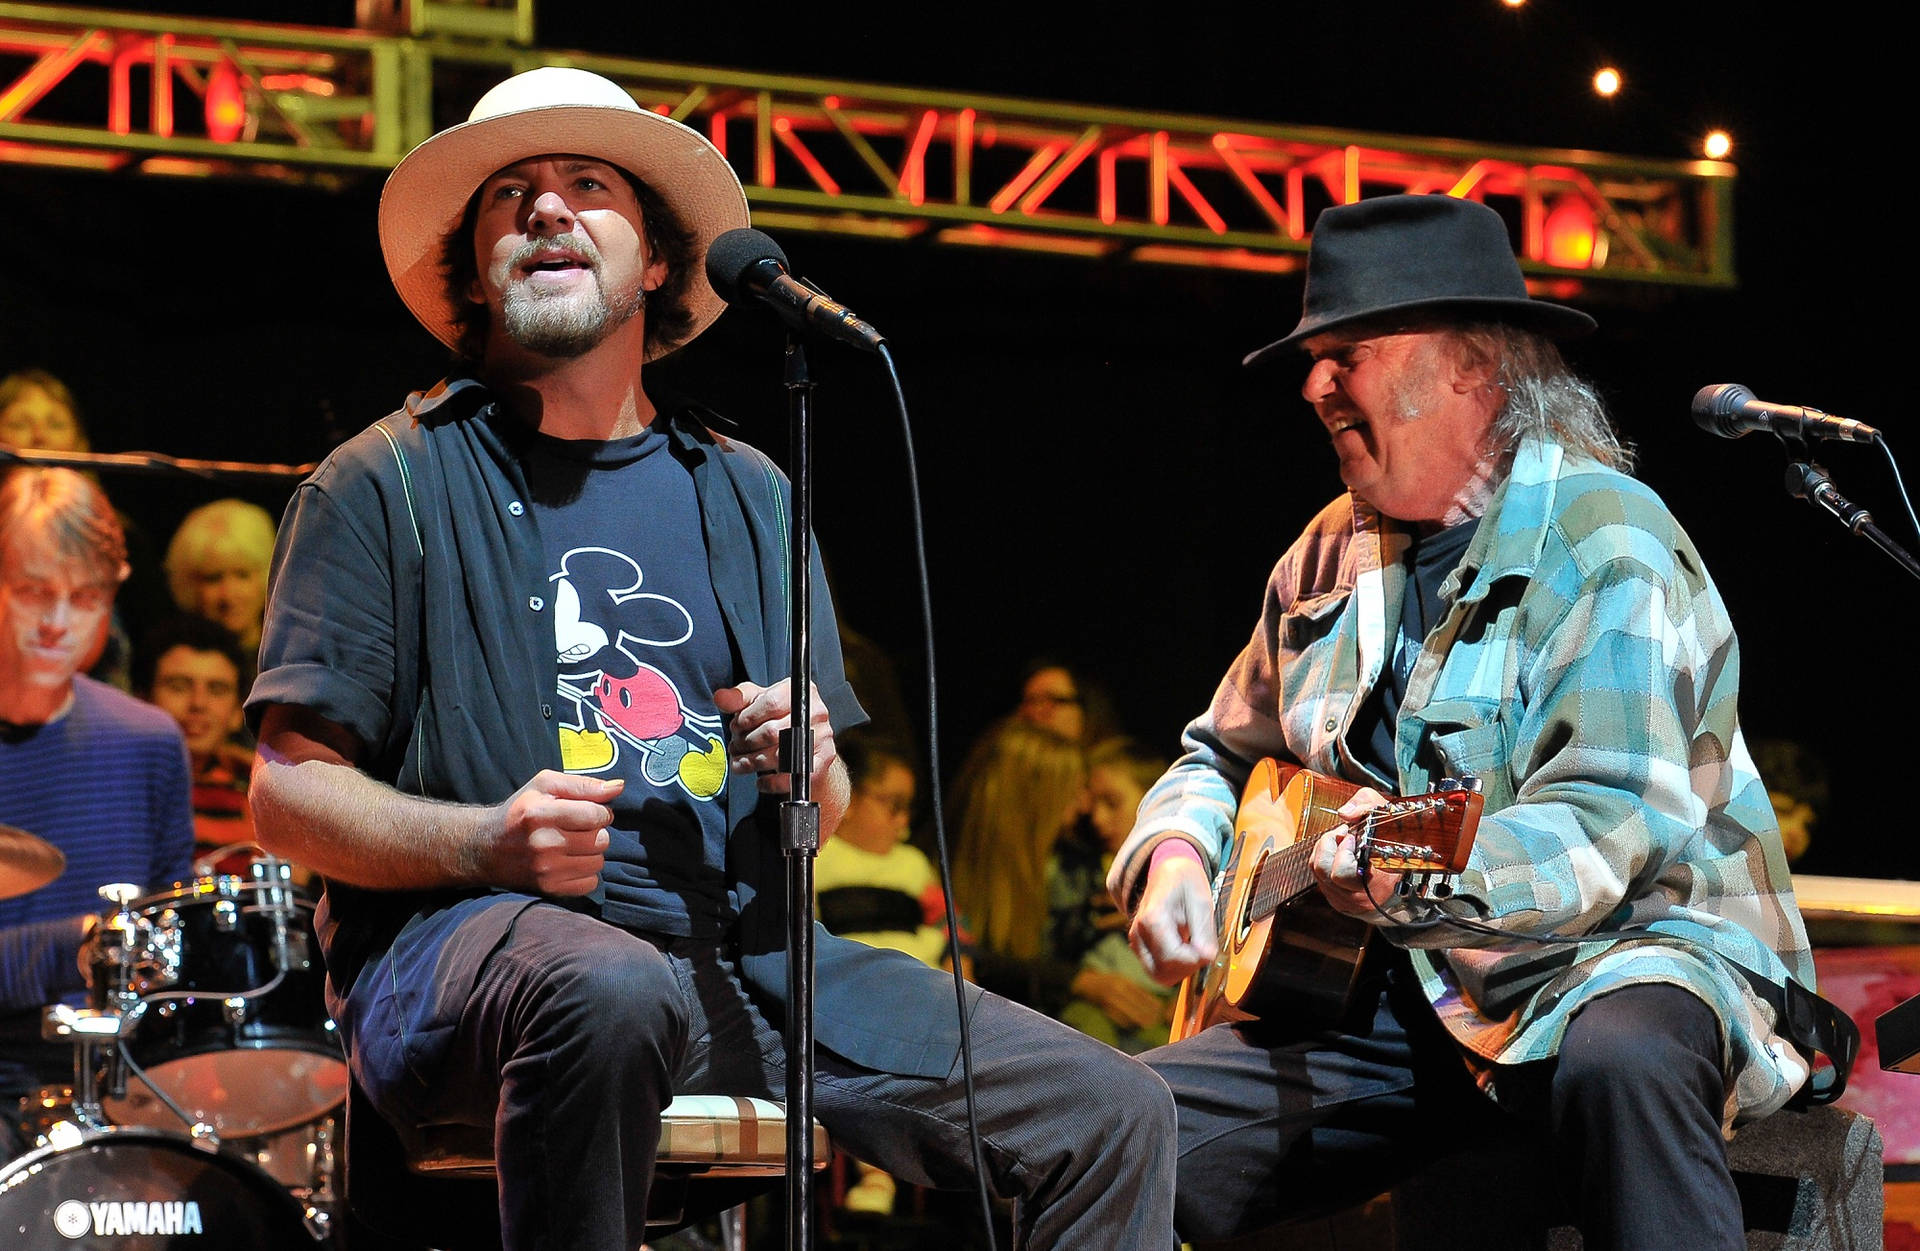 Classic Rock Icons - Eddie Vedder And Neil Young Performing With Pearl Jam